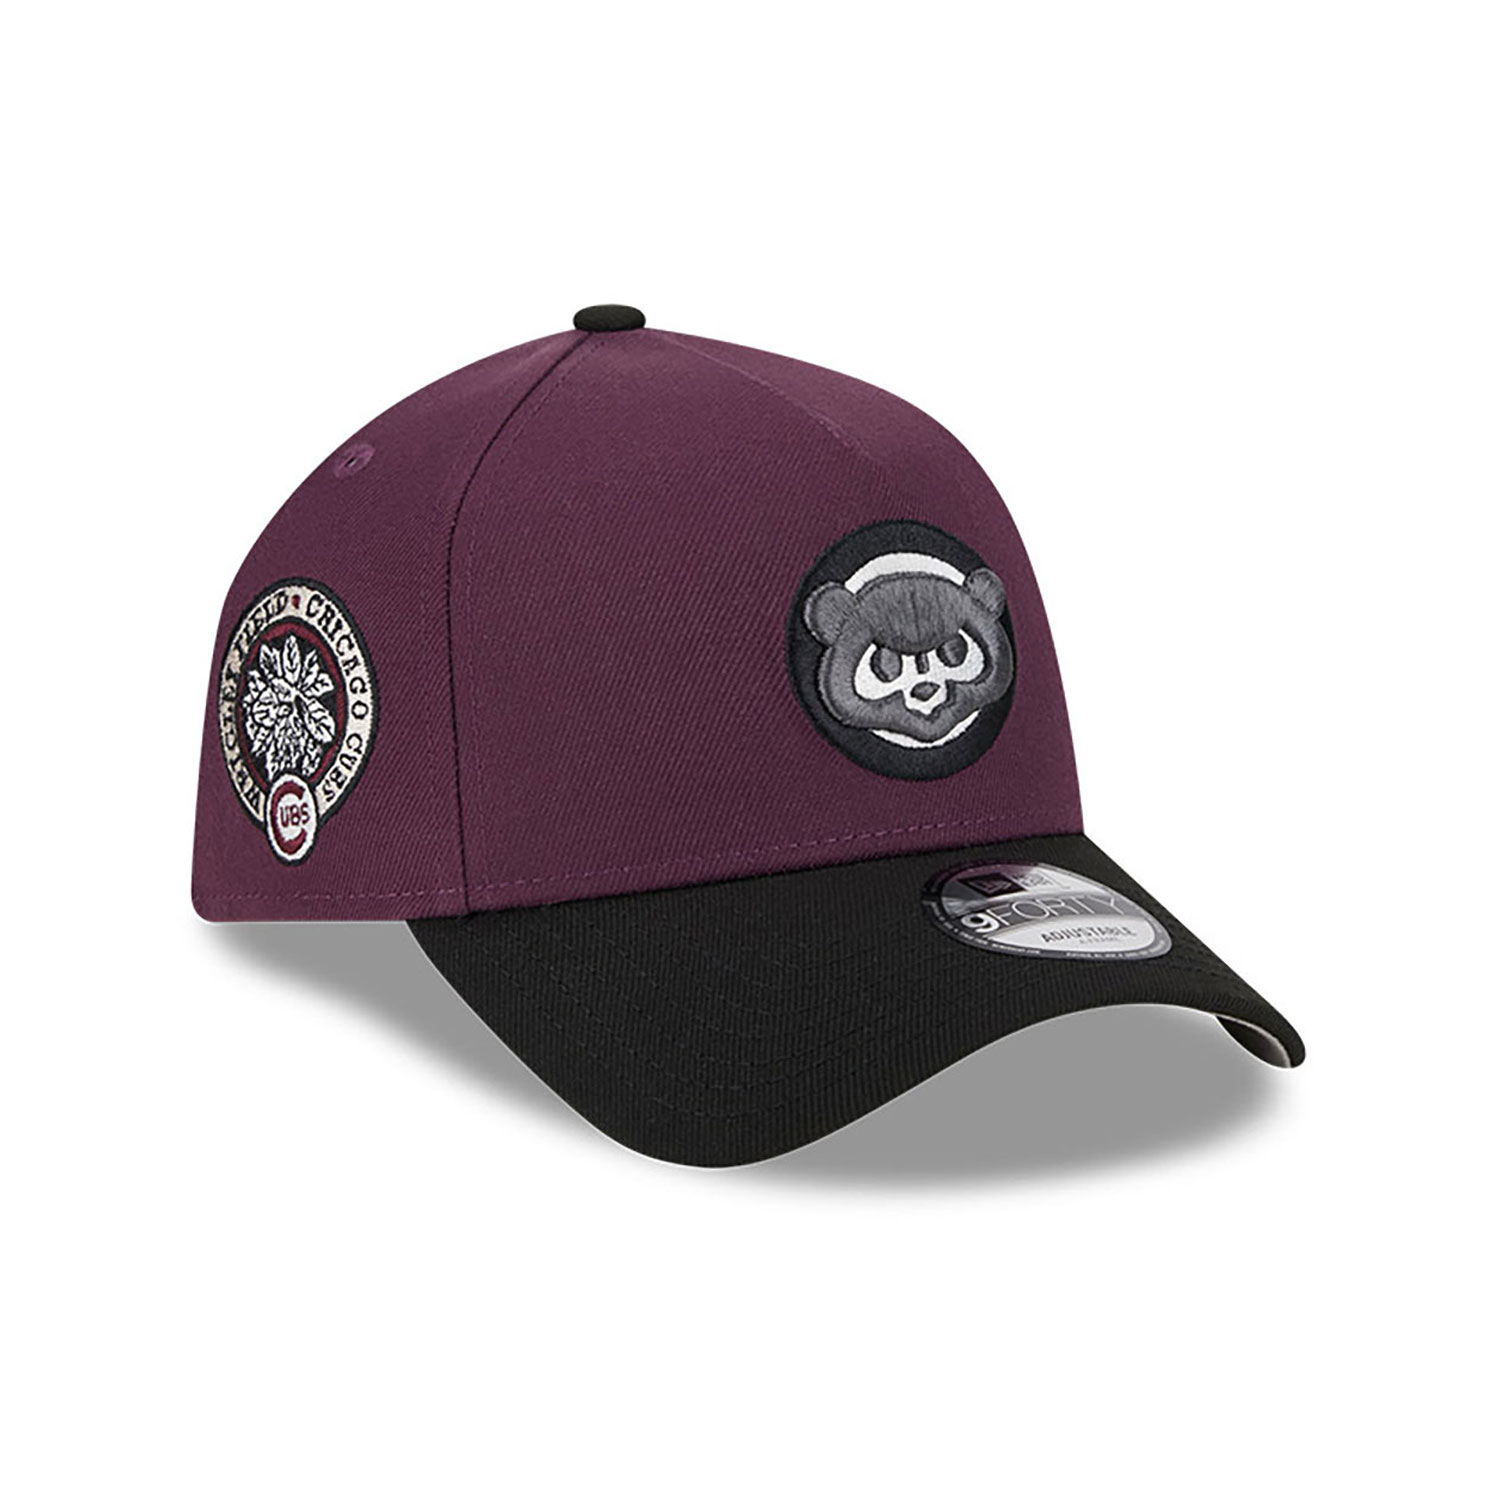 Chicago Cubs Two-Tone Dark Purple 9FORTY A-Frame Adjustable Cap